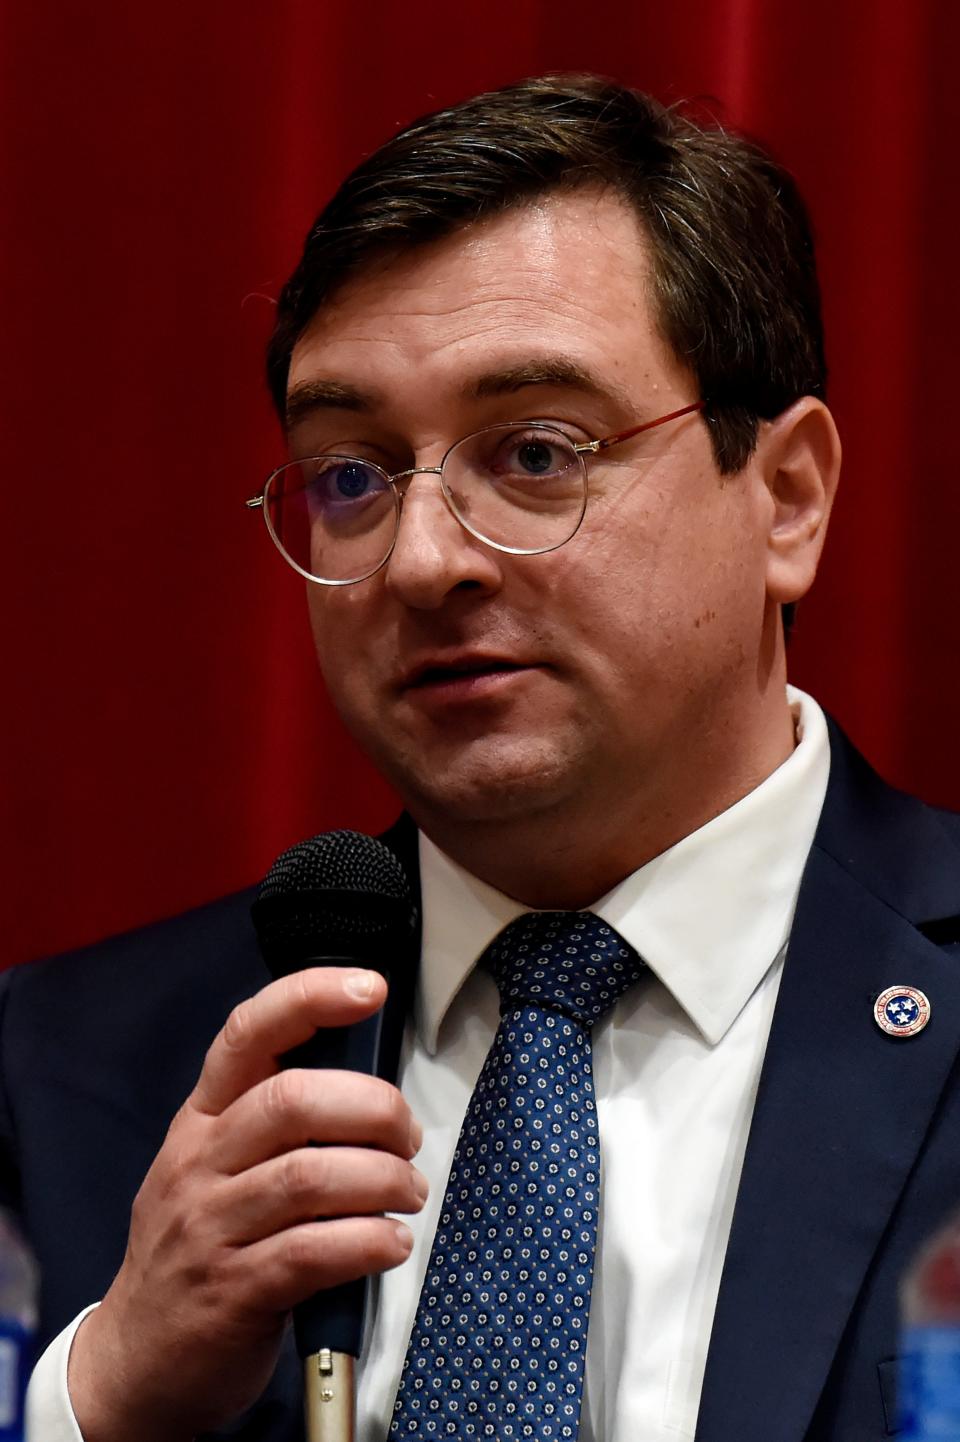 Tennessee Attorney General Jonathan Skrmetti speaks during a town hall meeting on March 2, 2023, in Clarksville, Tenn.